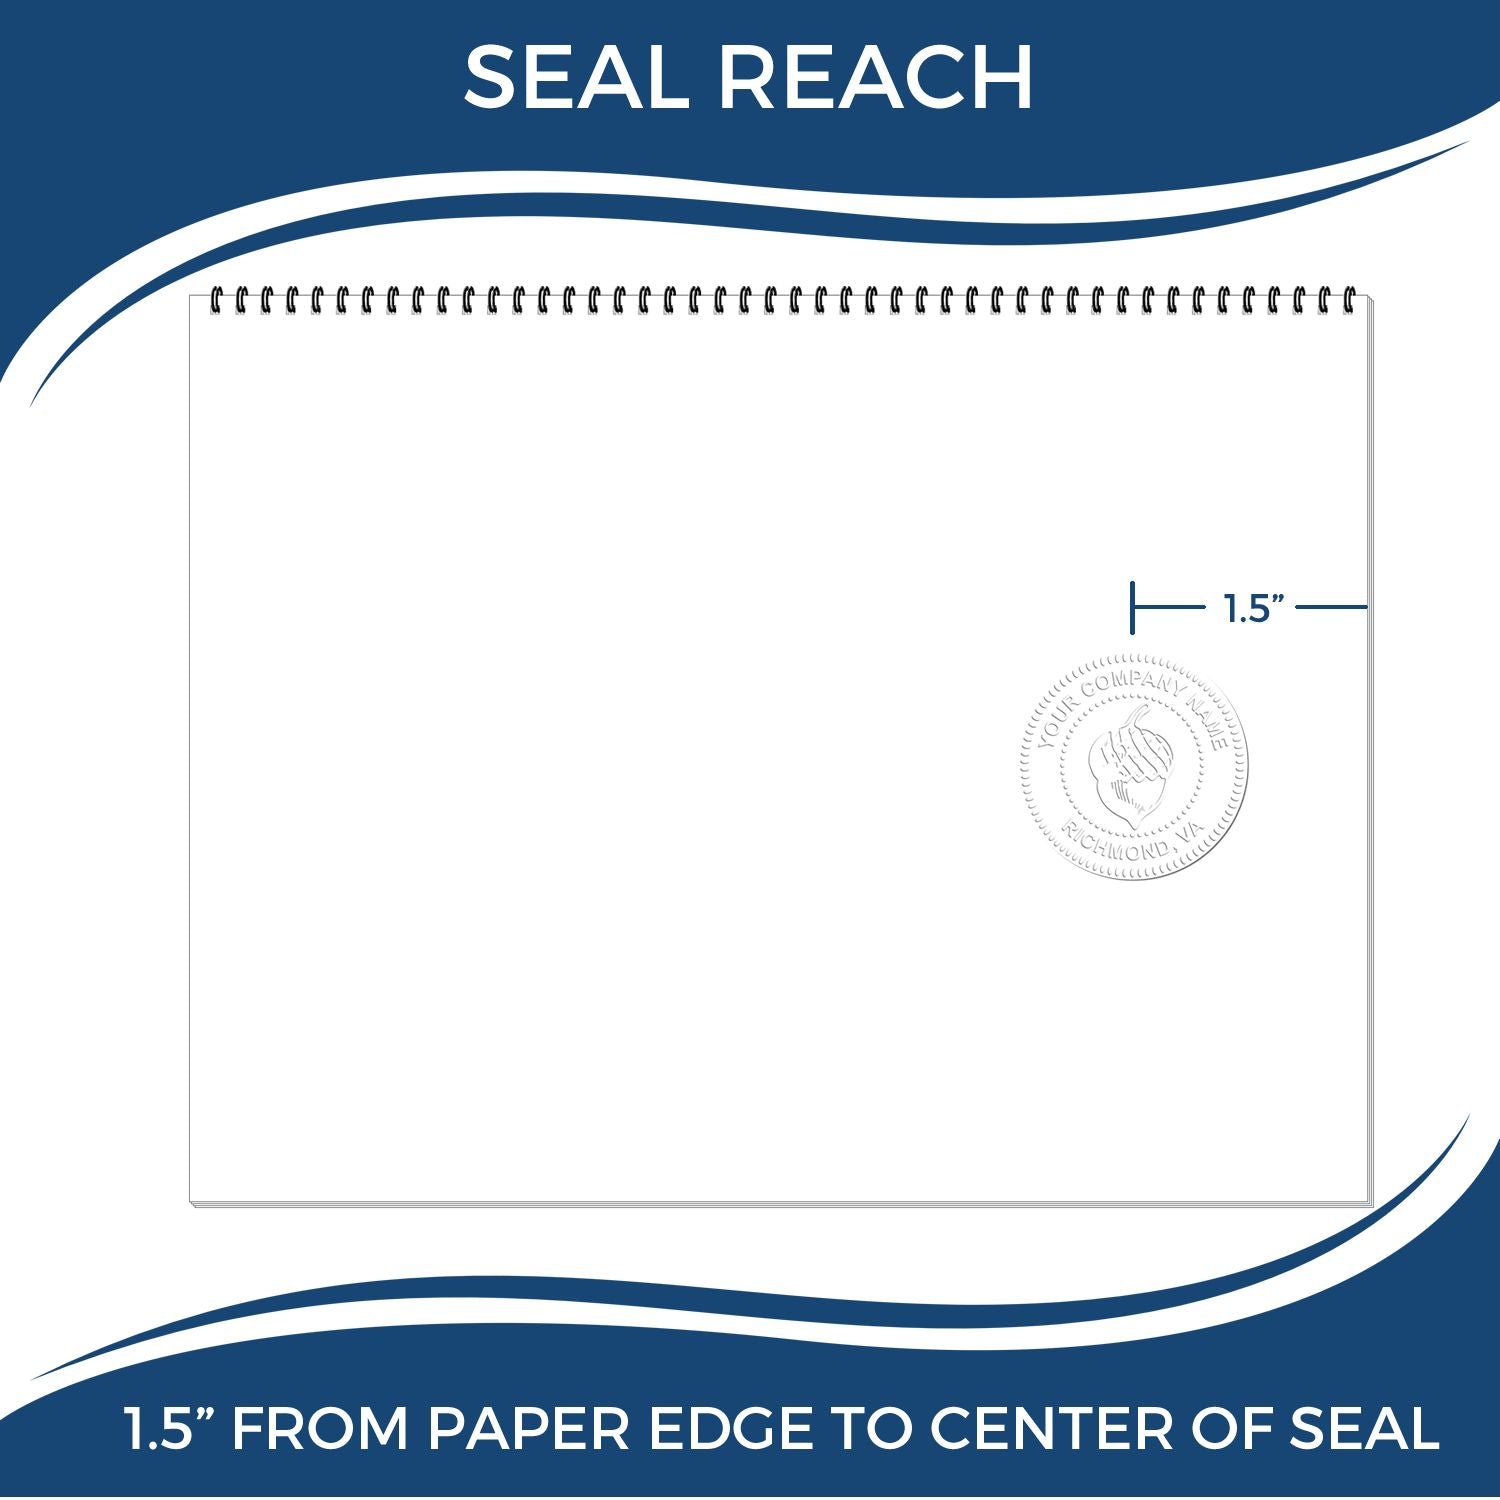 An infographic showing the seal reach which is represented by a ruler and a miniature seal image of the Handheld North Carolina Architect Seal Embosser